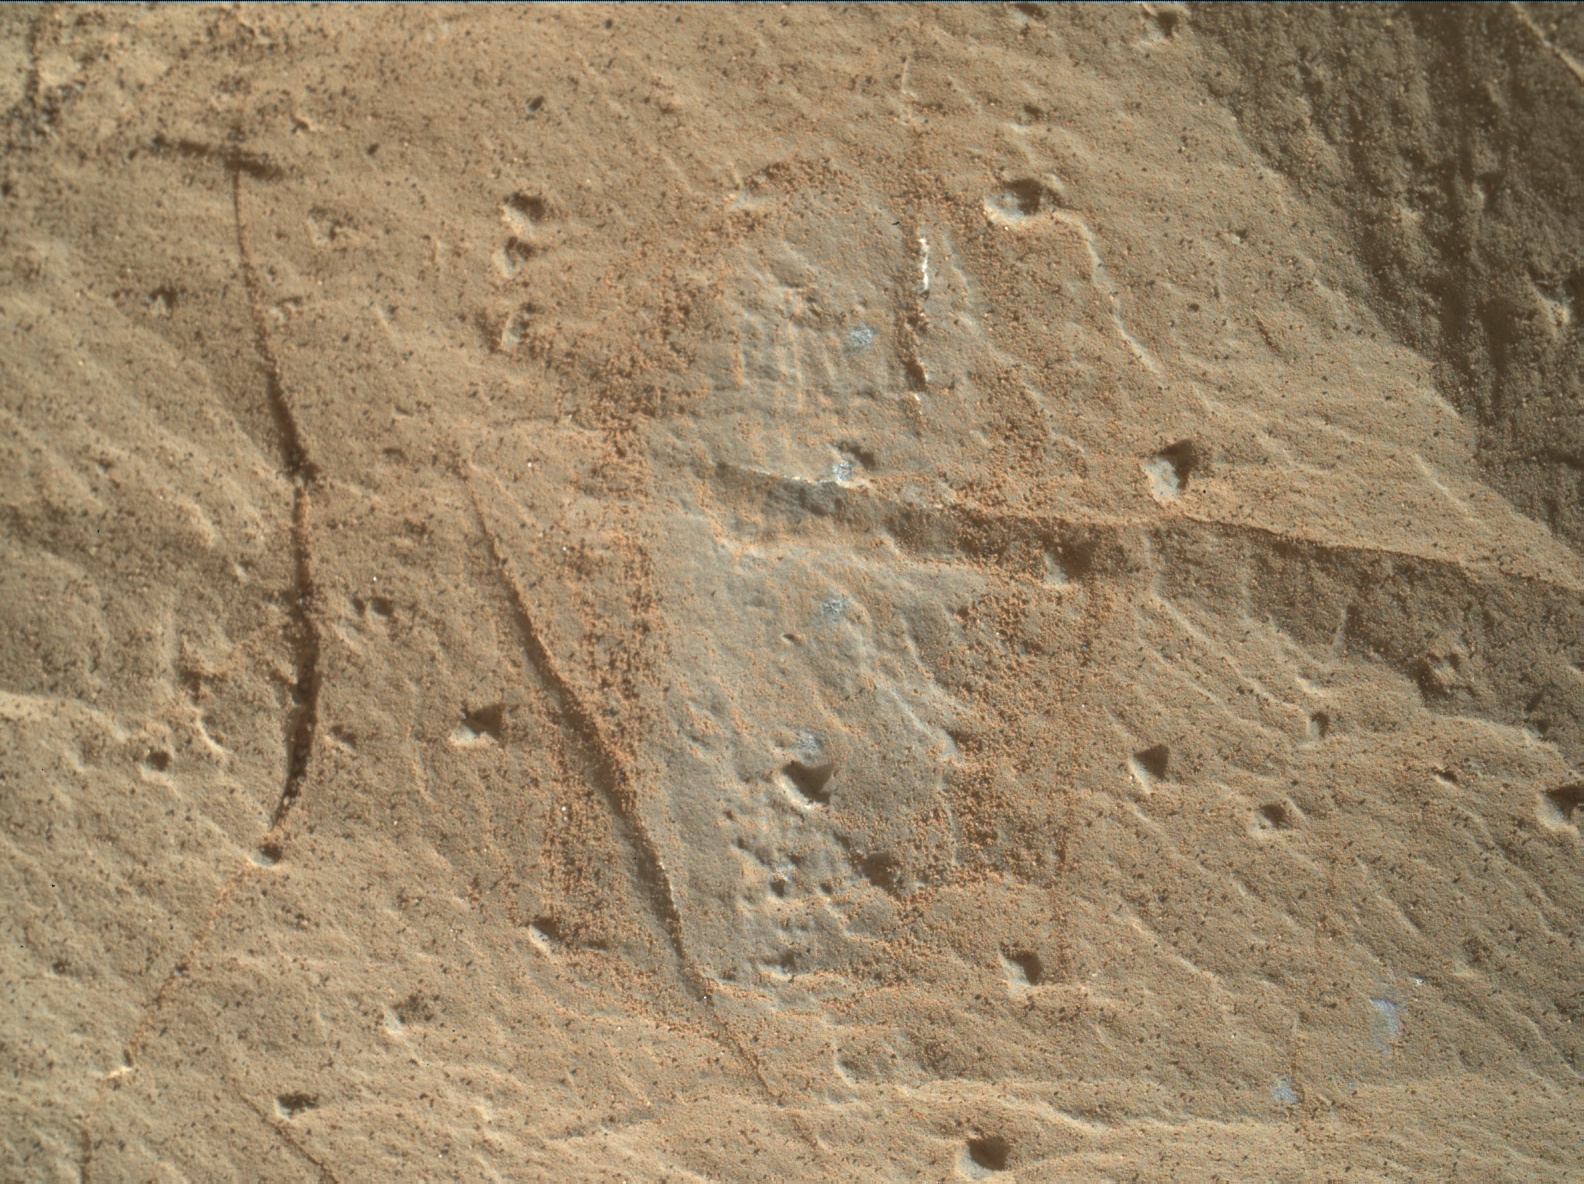 Nasa's Mars rover Curiosity acquired this image using its Mars Hand Lens Imager (MAHLI) on Sol 1904